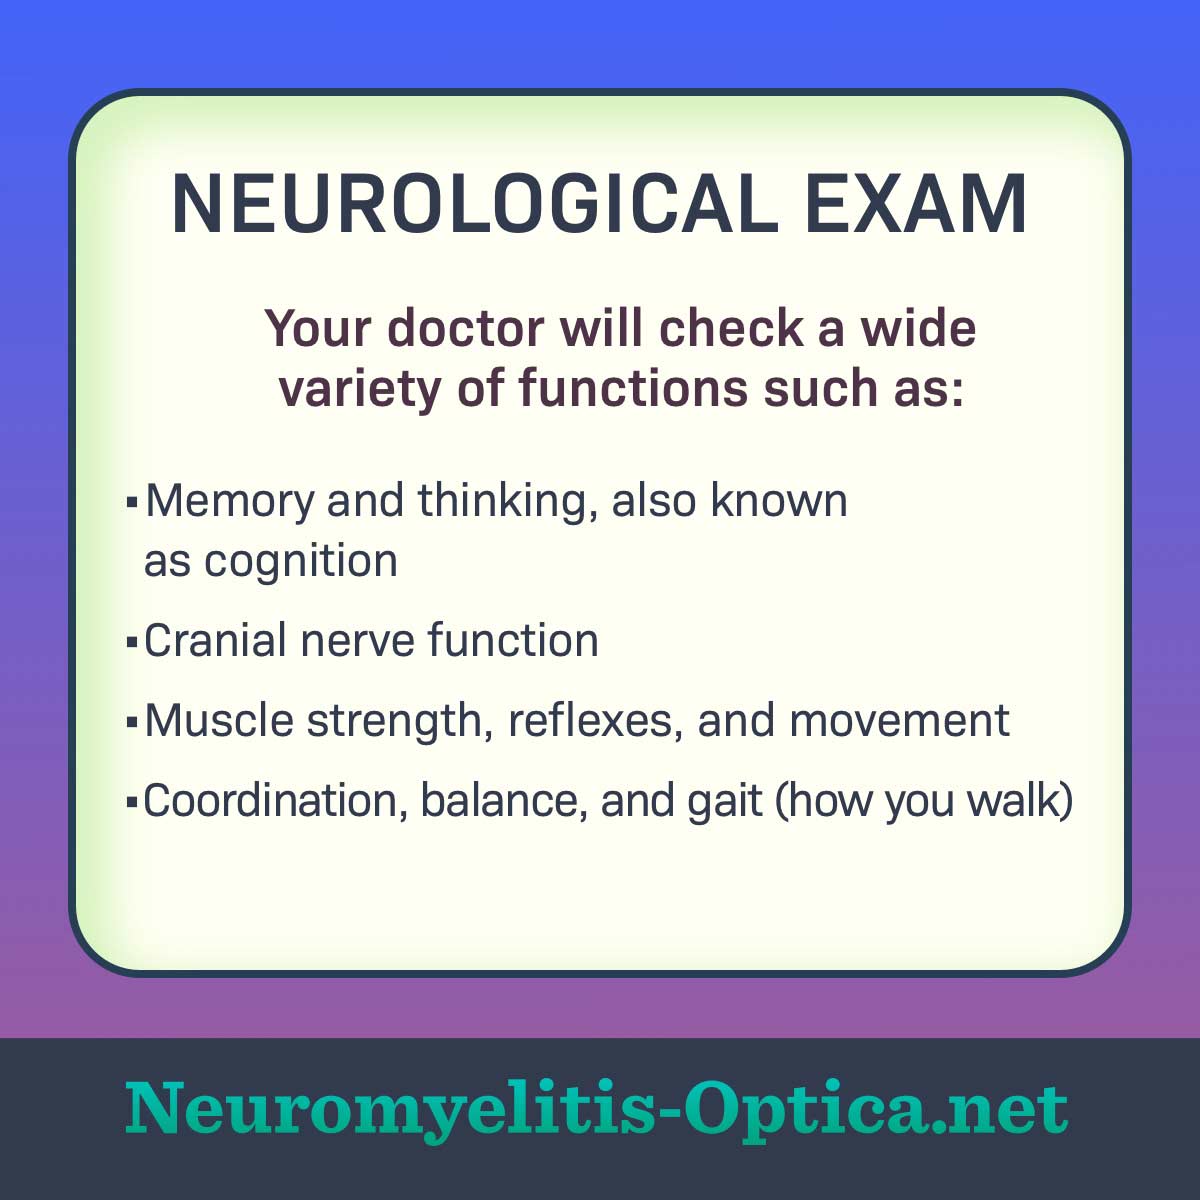 A chart highlighting key questions your doctor may ask during a neurological exam.